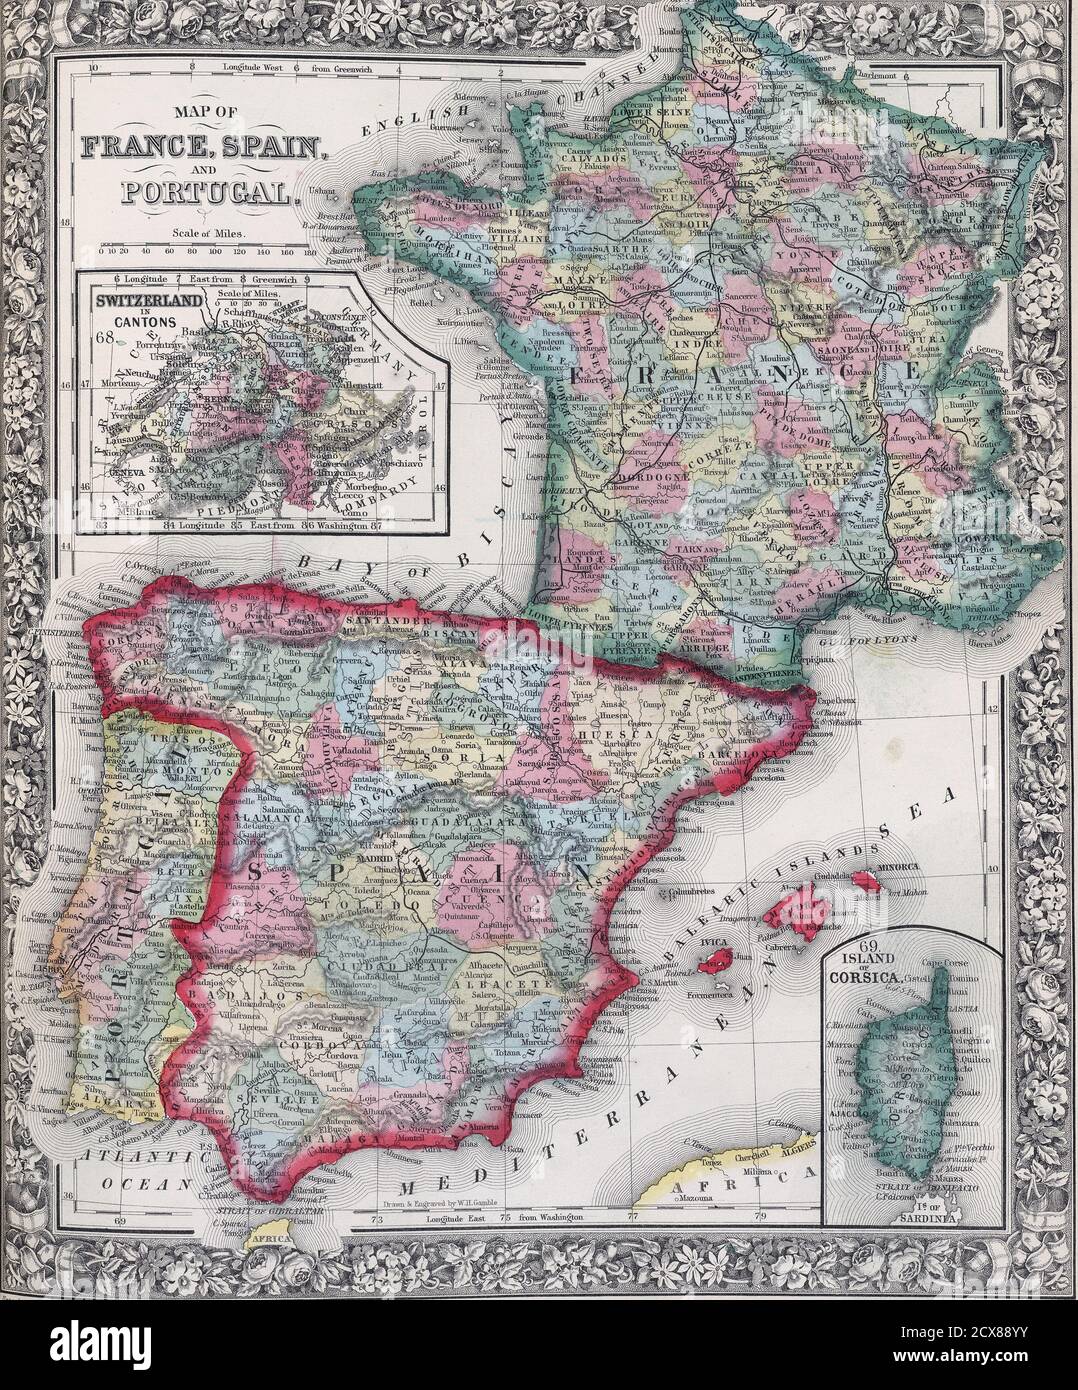 Antique Map Of Spain France And Portugal From 19th Century Atlas Modified From The Map Released Under Creative Commons License From The The New York Stock Photo Alamy